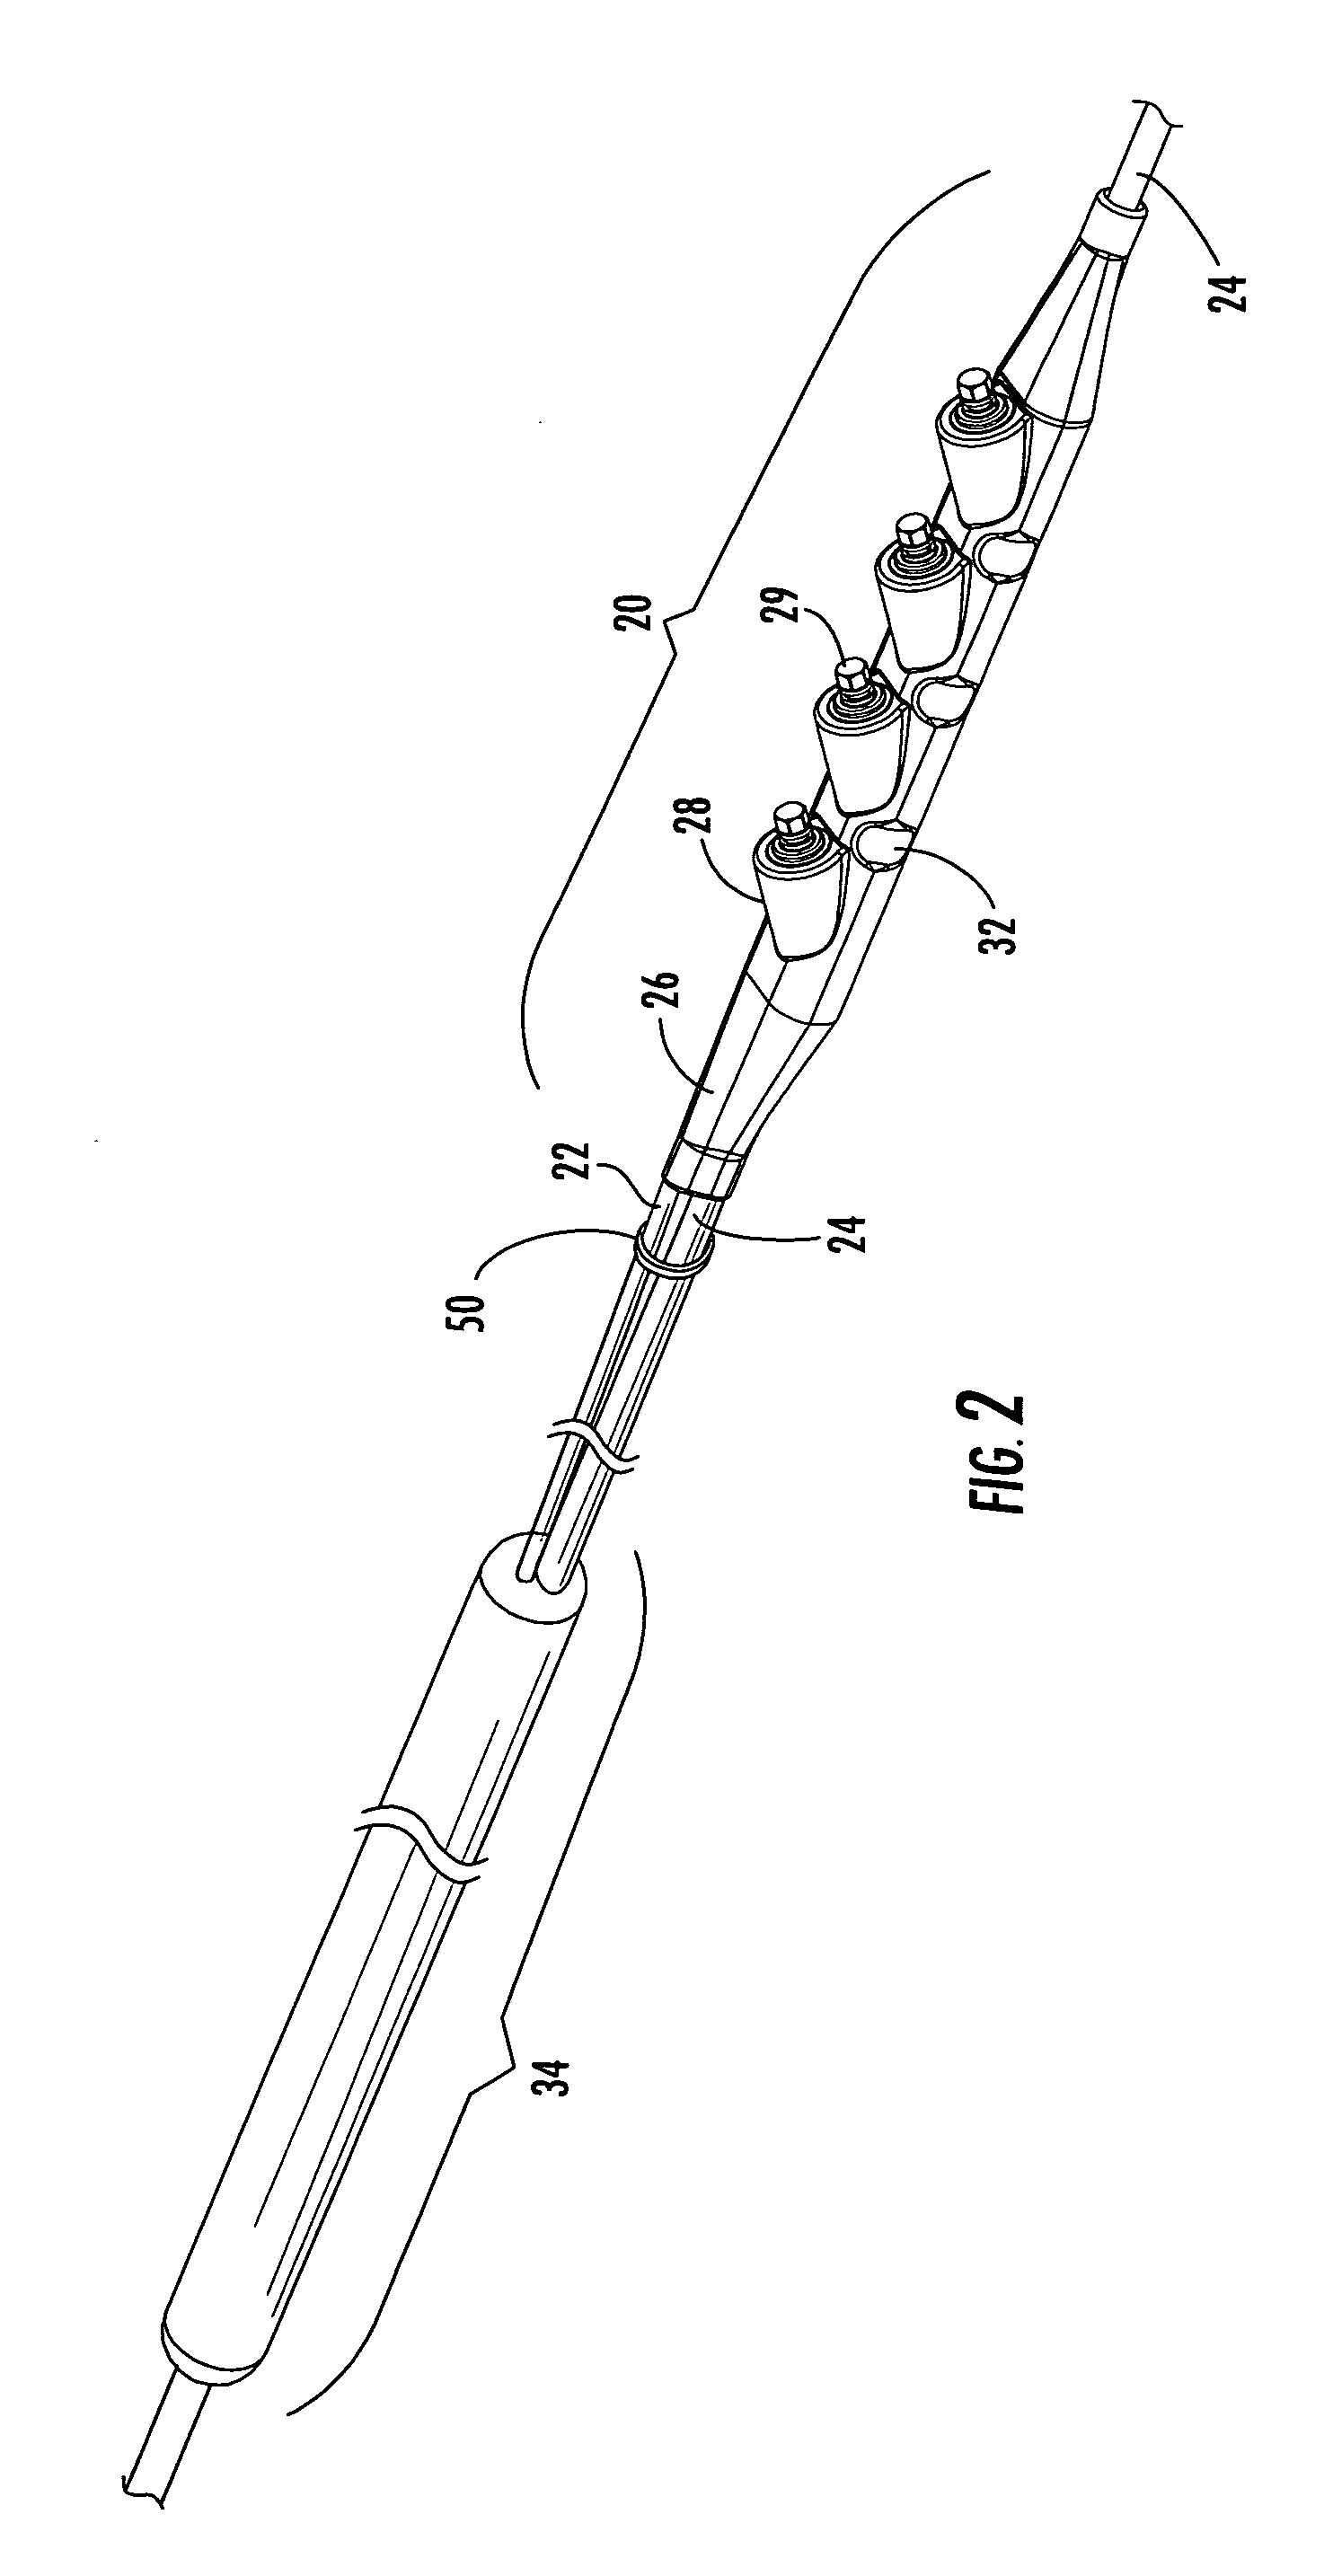 Adjustable tether assembly for fiber optic distribution cable